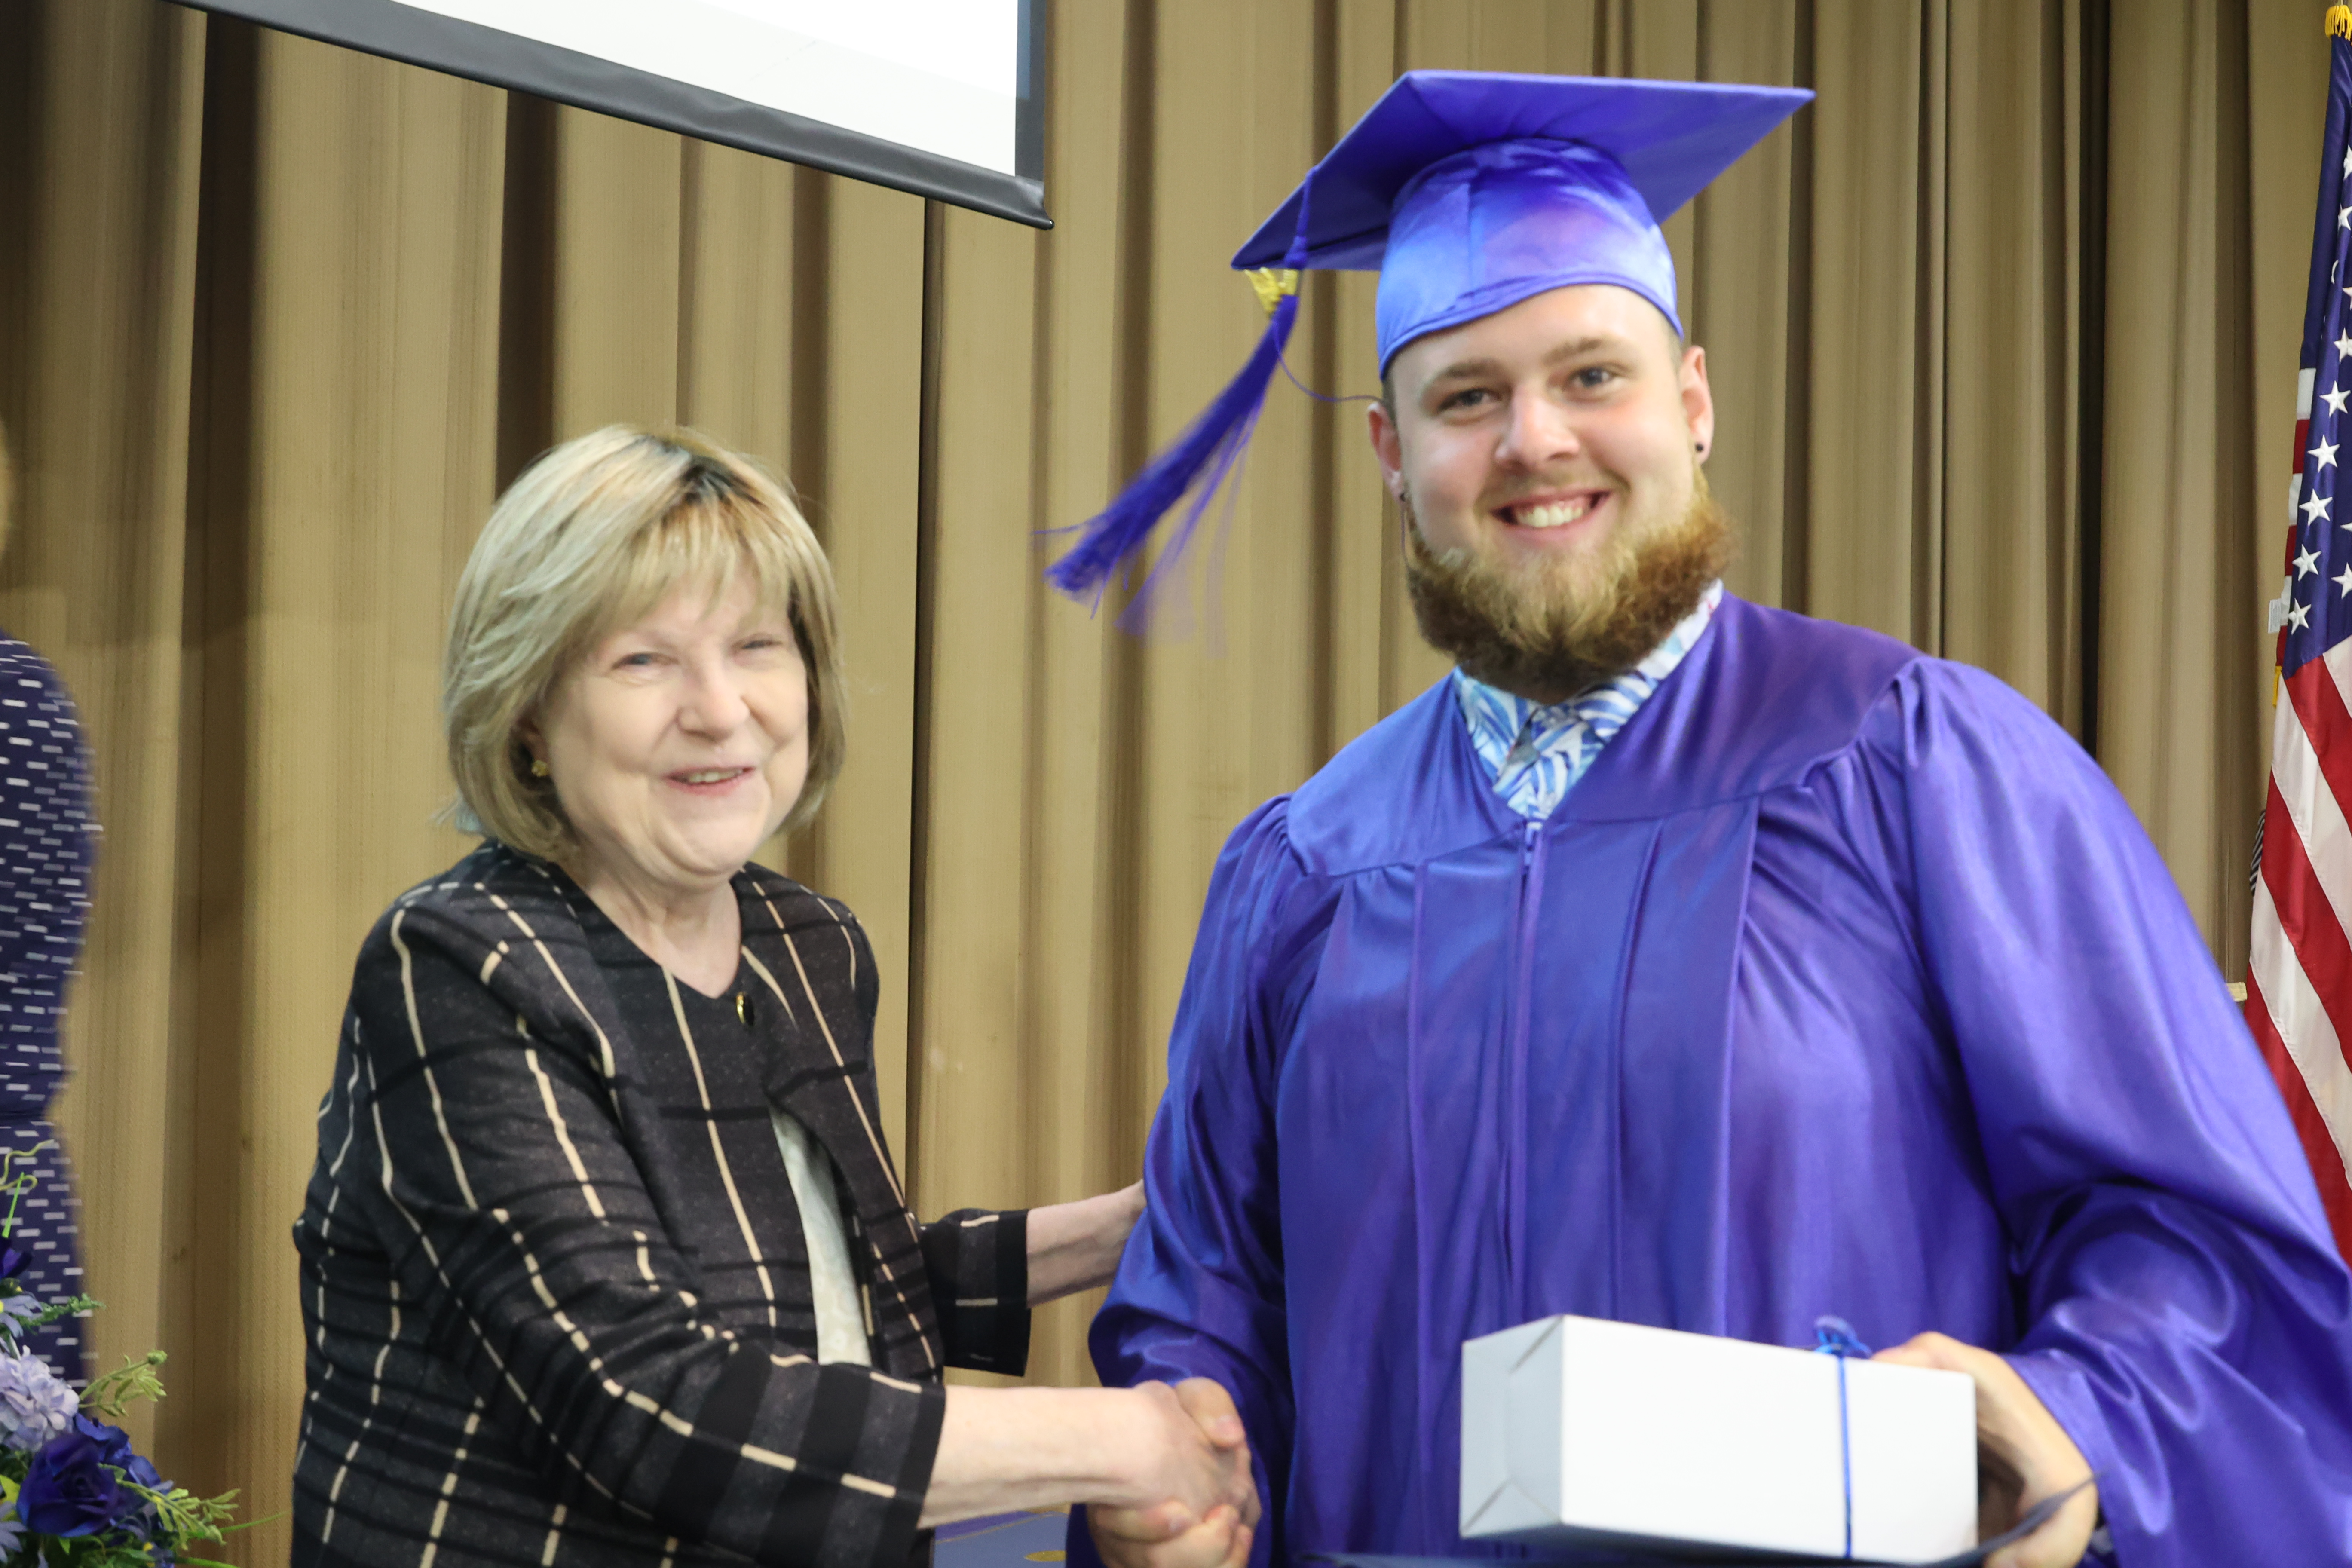 A man wears a cap and gown and is congratulated on stage with a gift by a female staff member